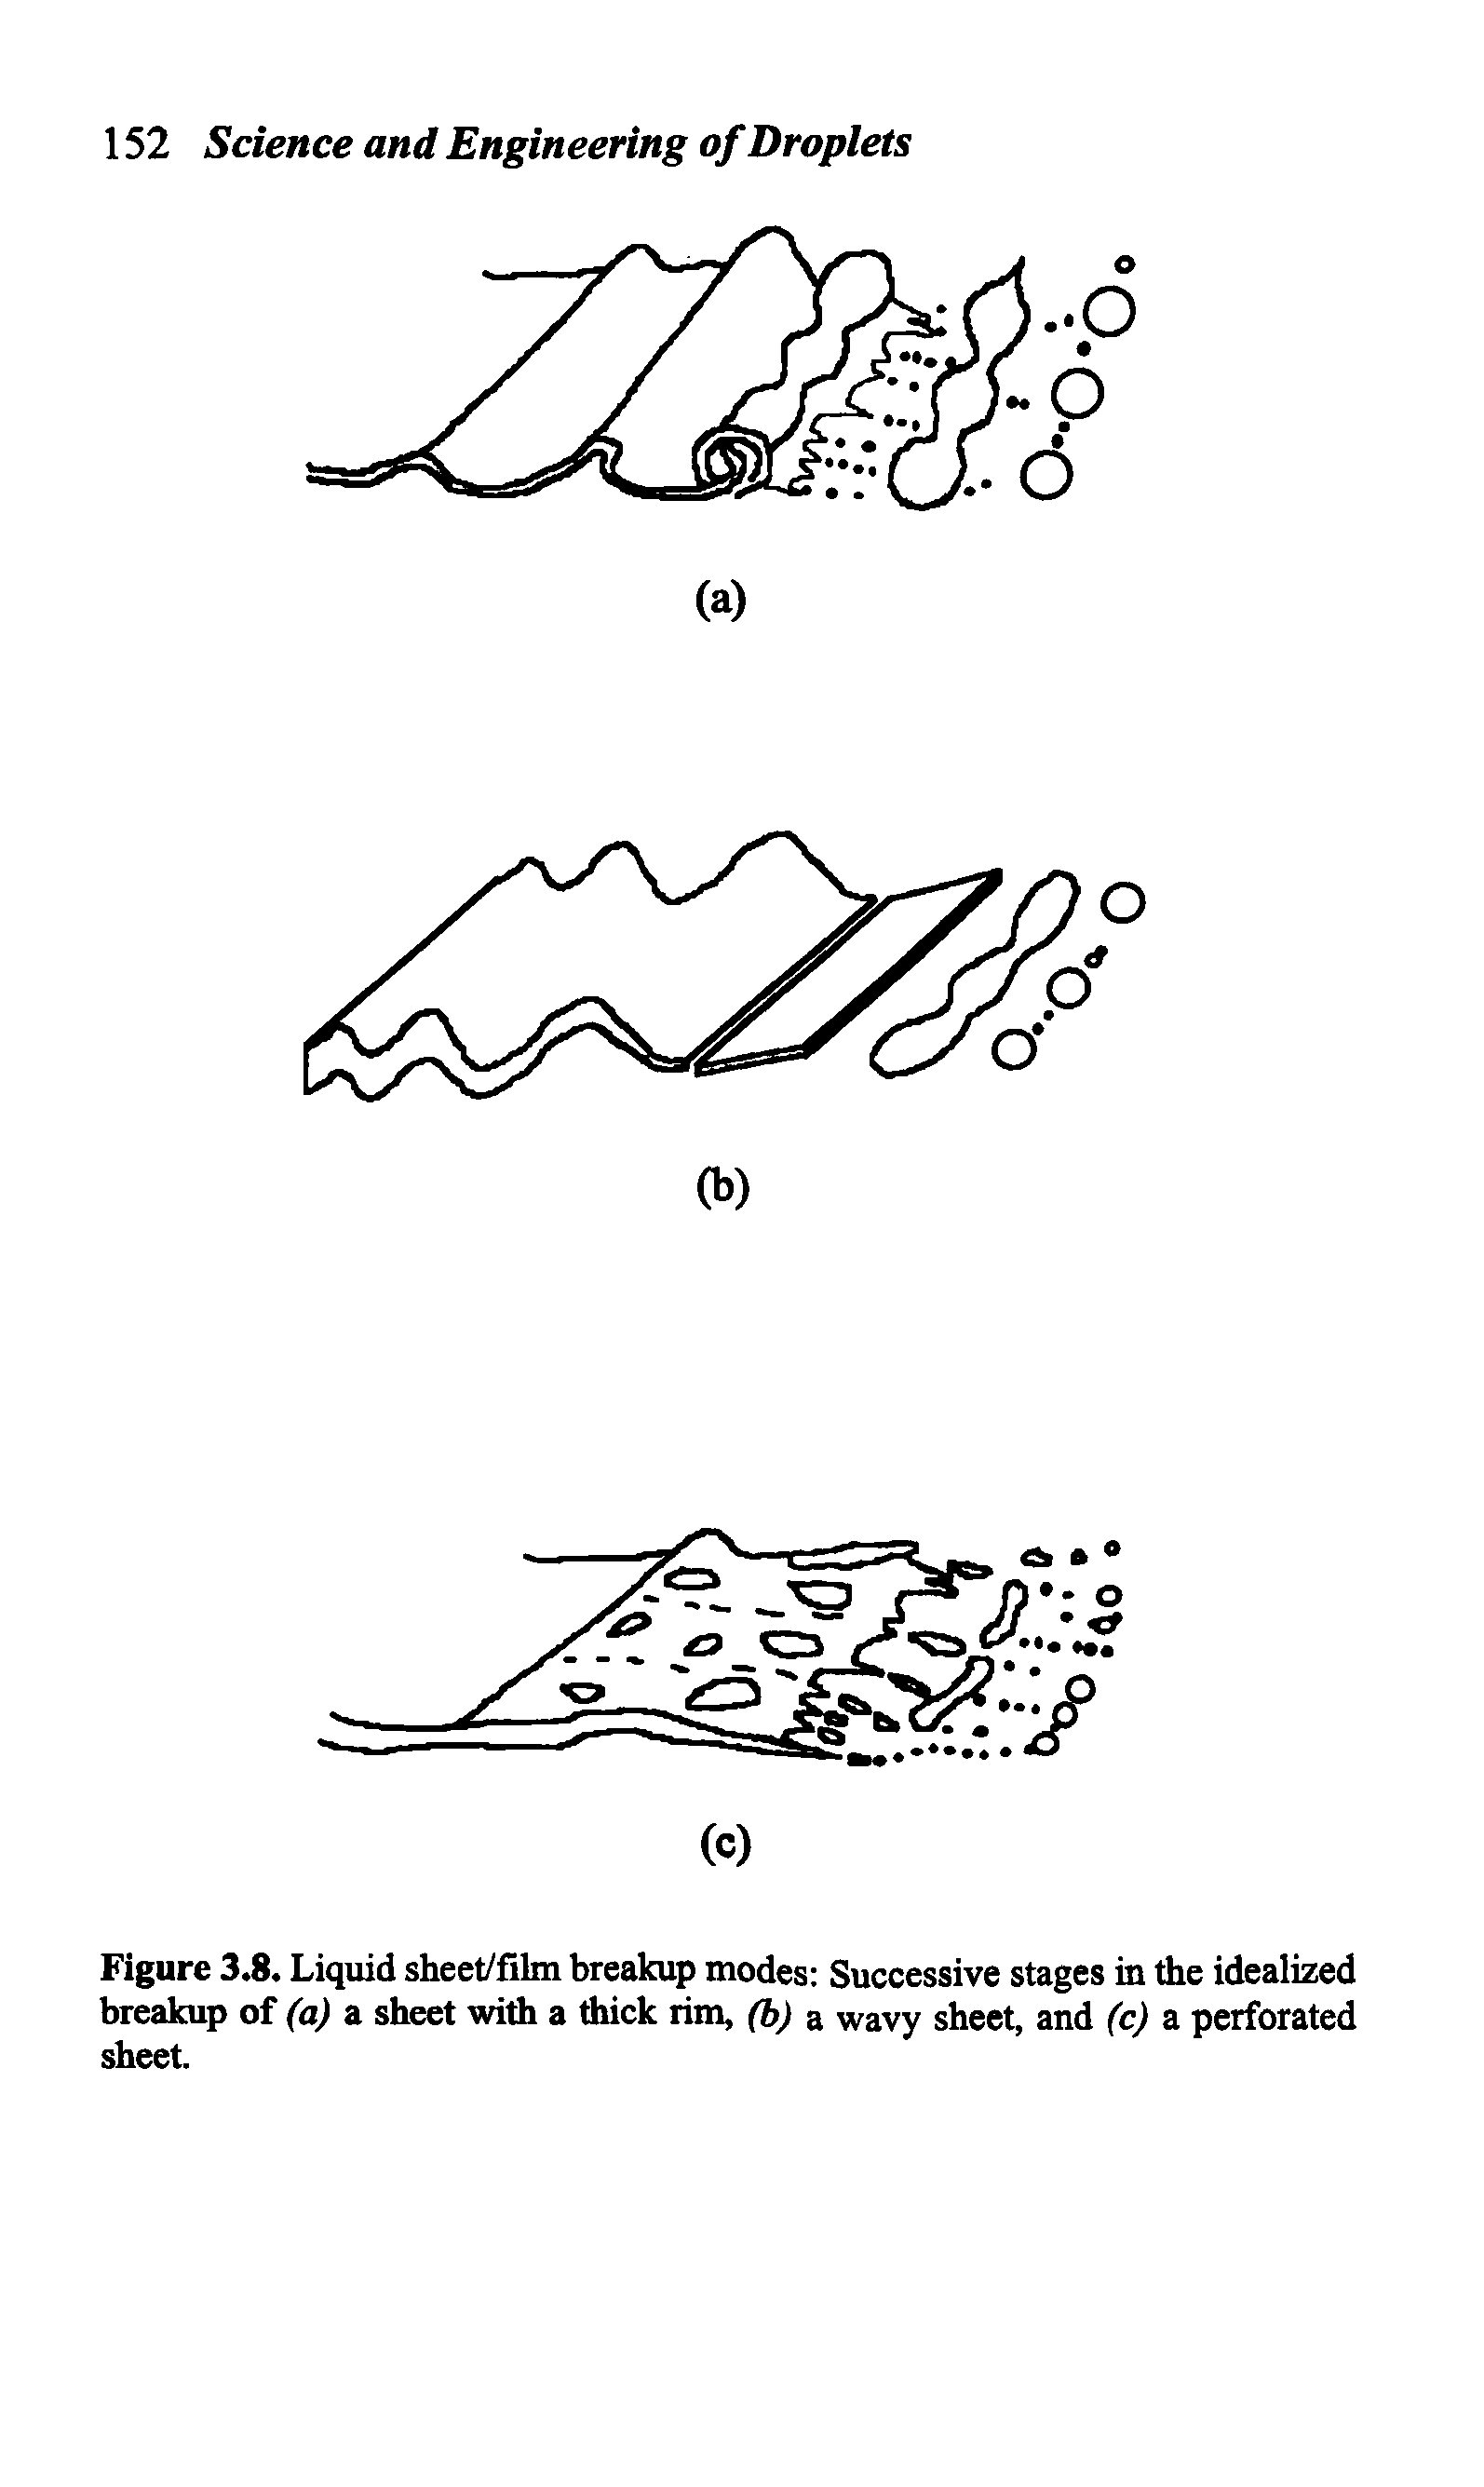 Figure 3.8. Liquid sheet/film breakup modes Successive stages in the idealized breakup of (a) a sheet with a thick rim, (b) a wavy sheet, and (c) a perforated sheet.